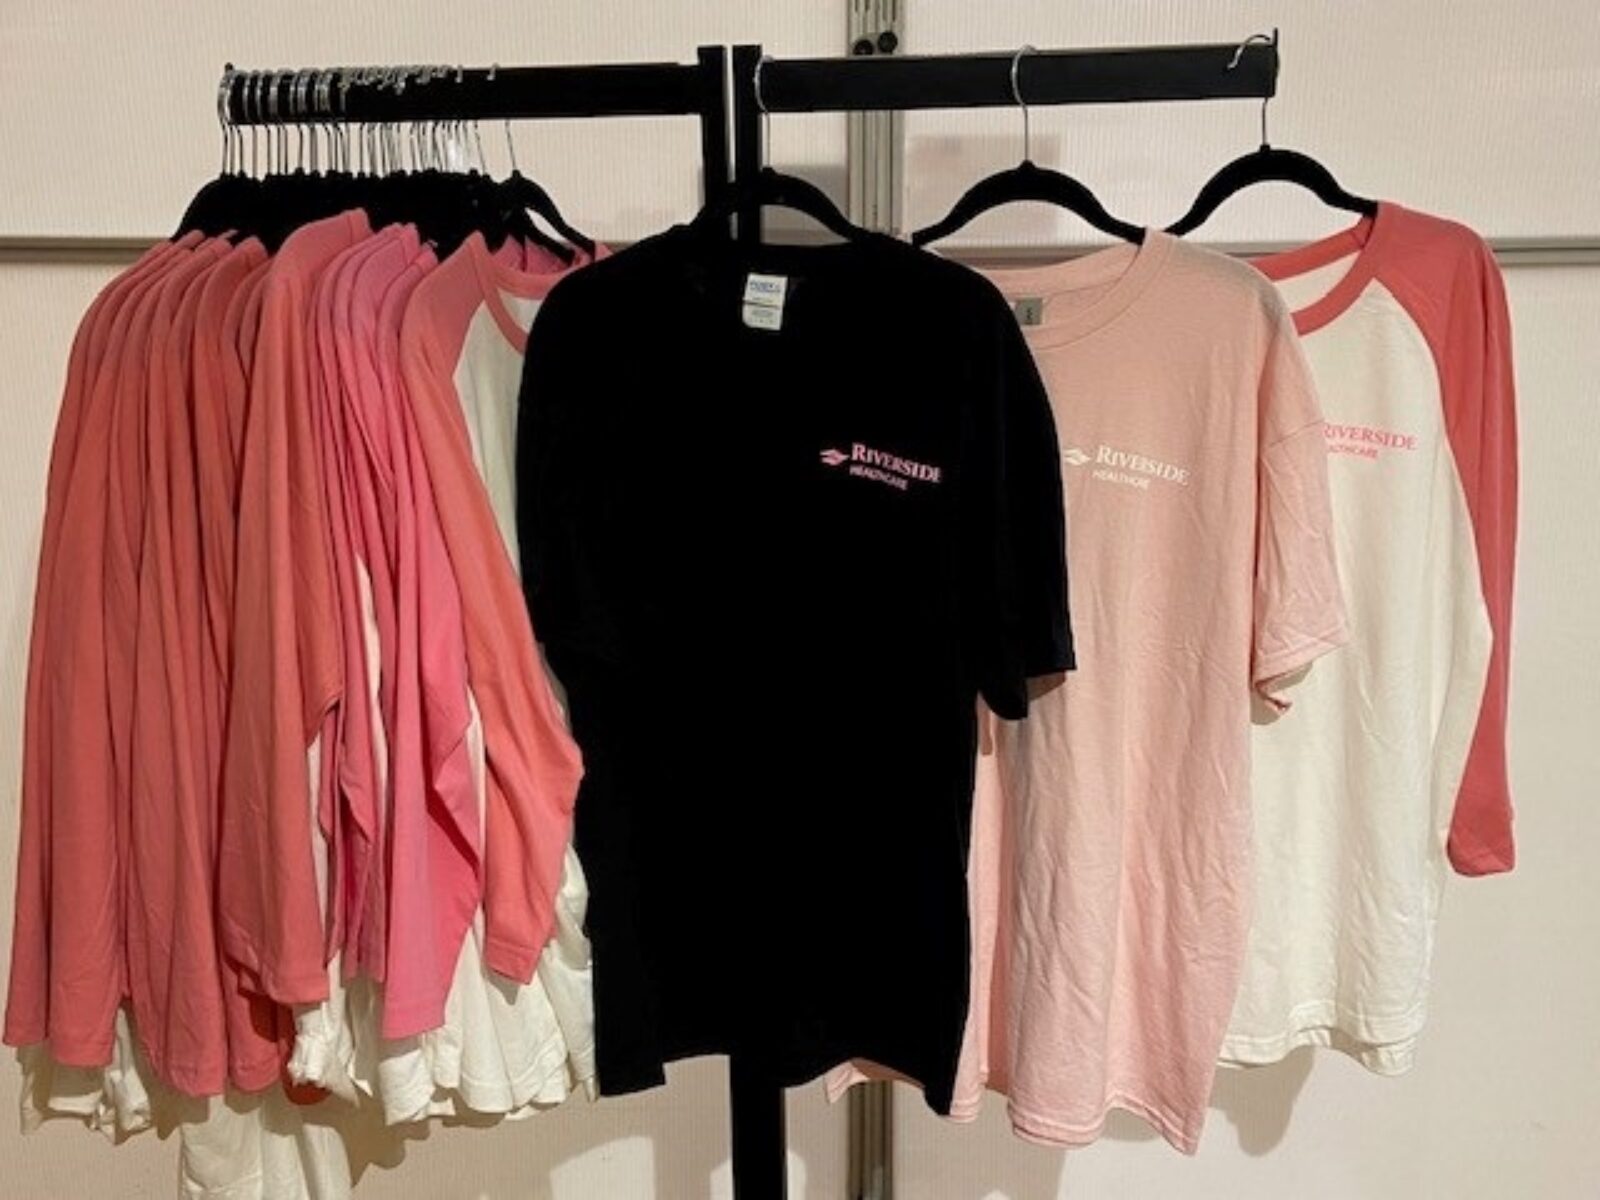 Check out the Pink Riverside Logo wear at the Marketplace Gift Shop